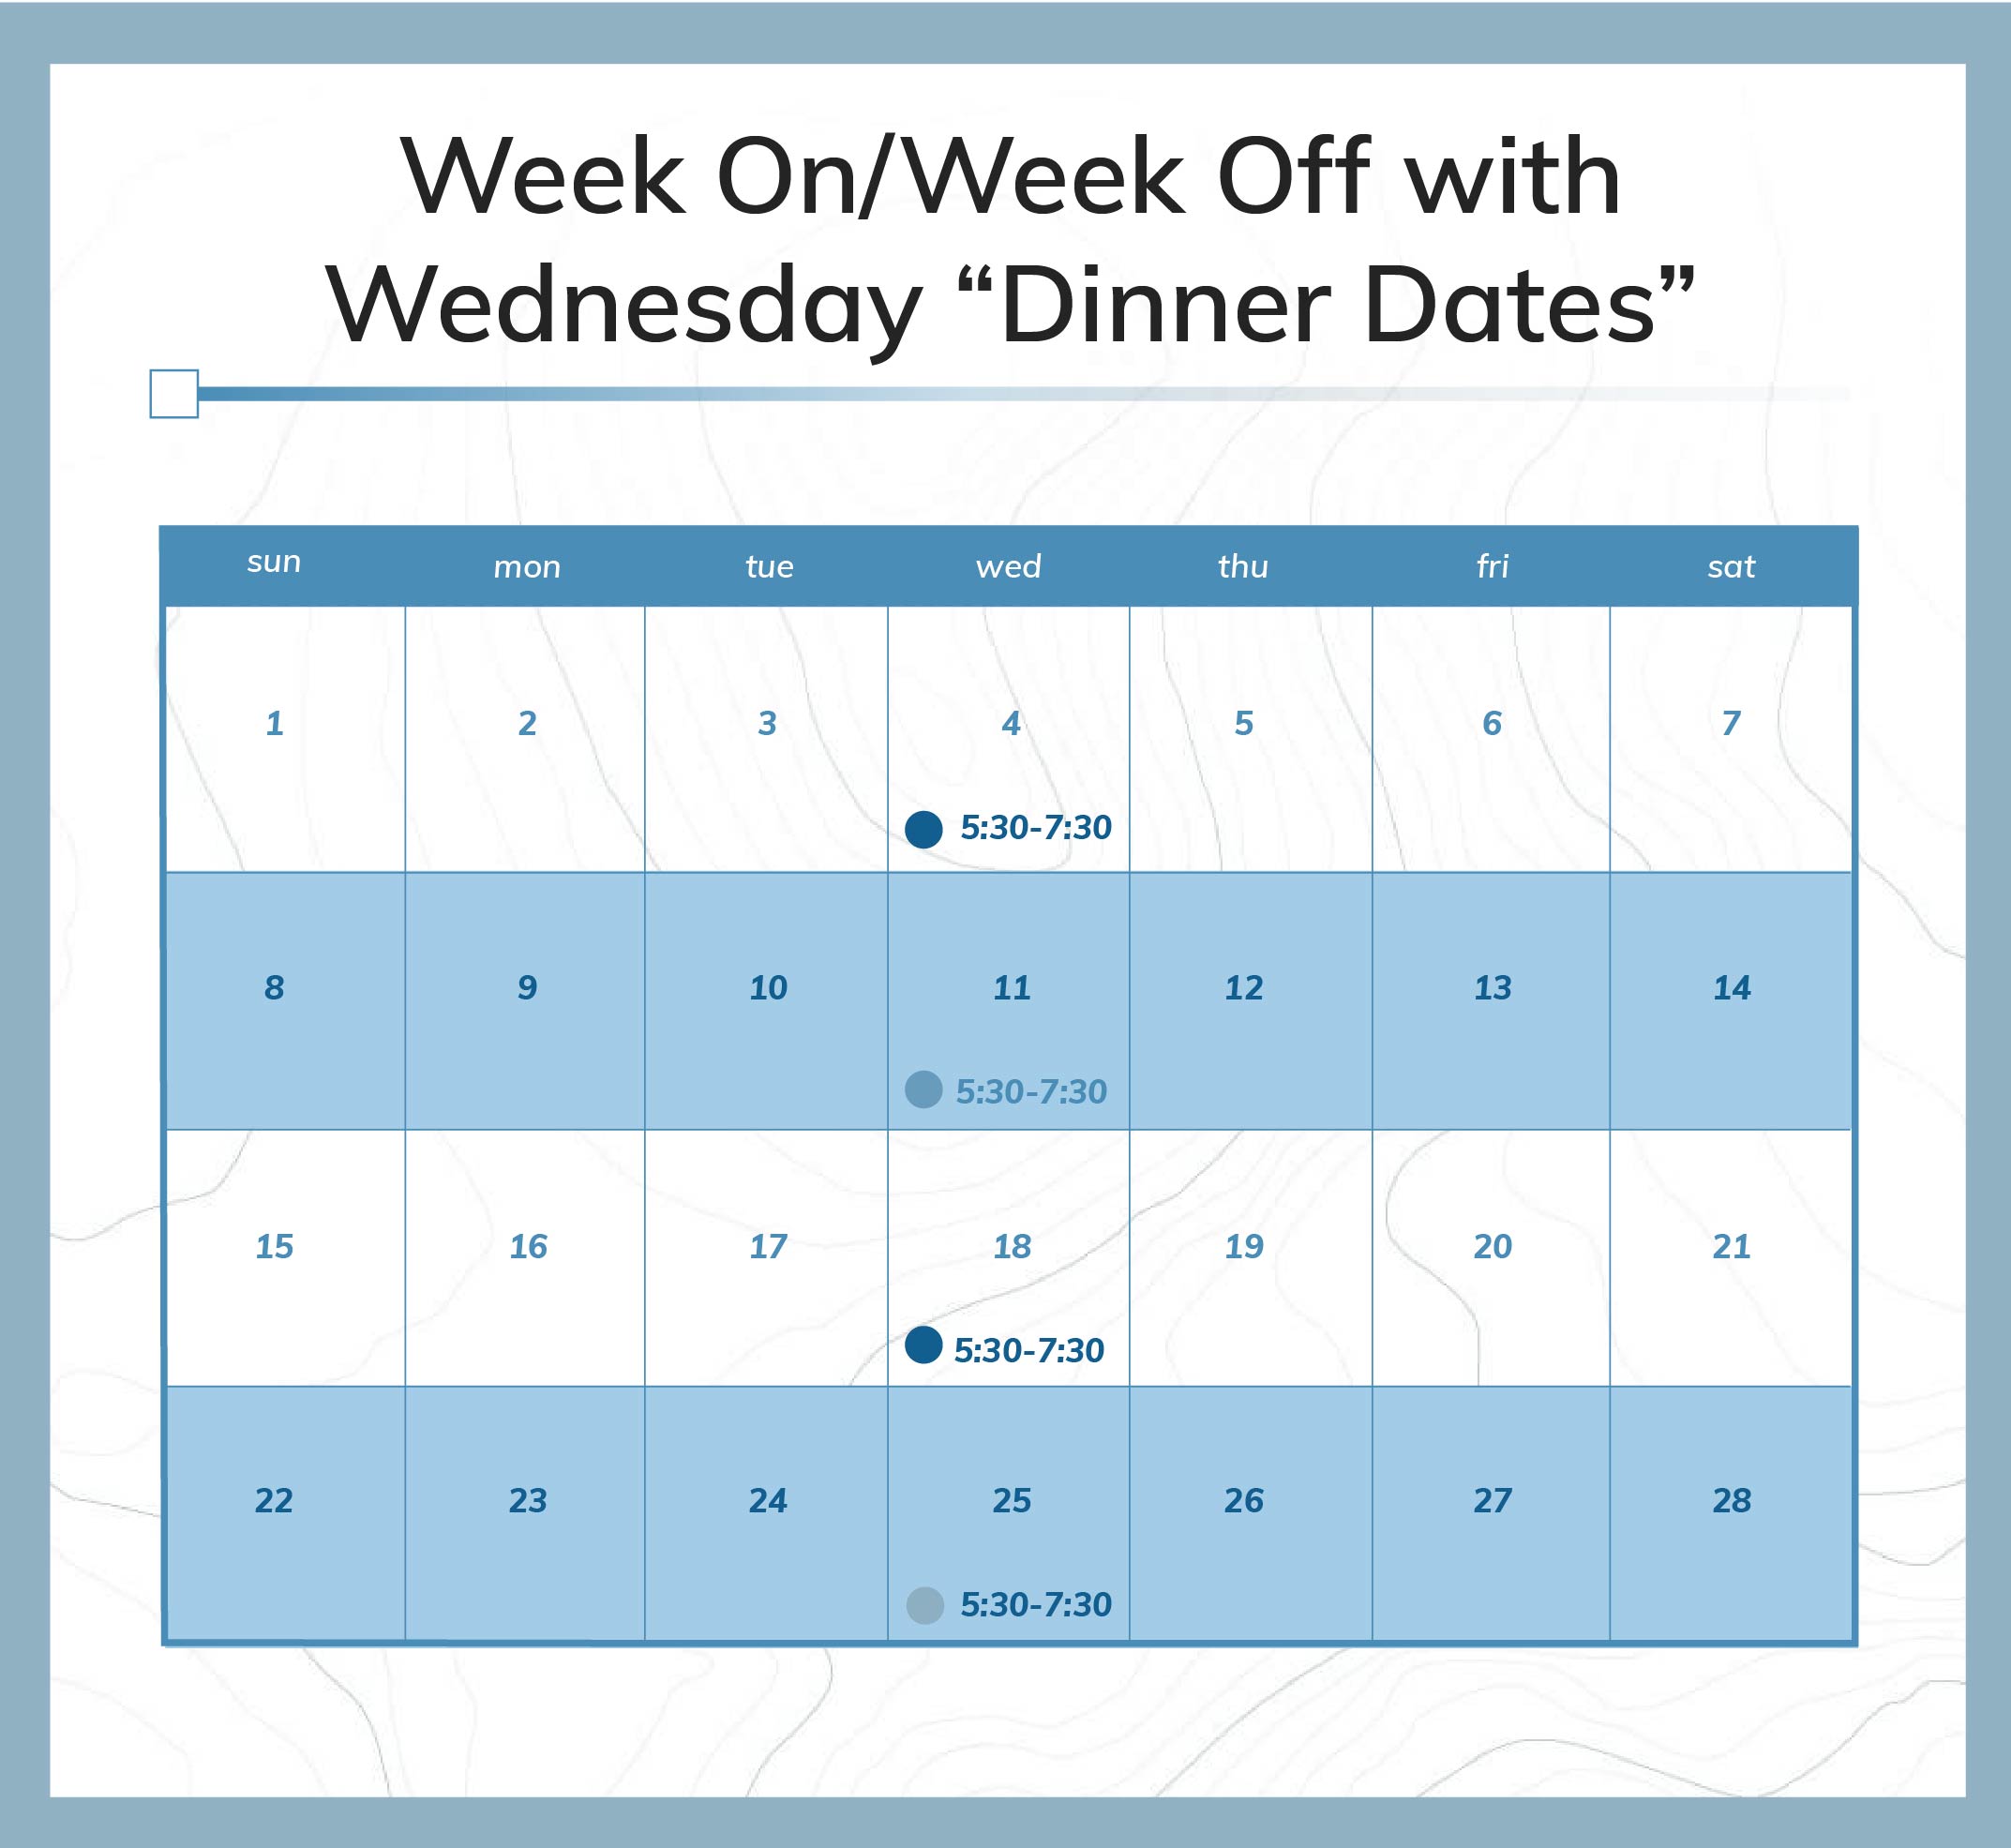 Parenting Schedule - Week On/Week Off with Wednesday “Dinner Dates”